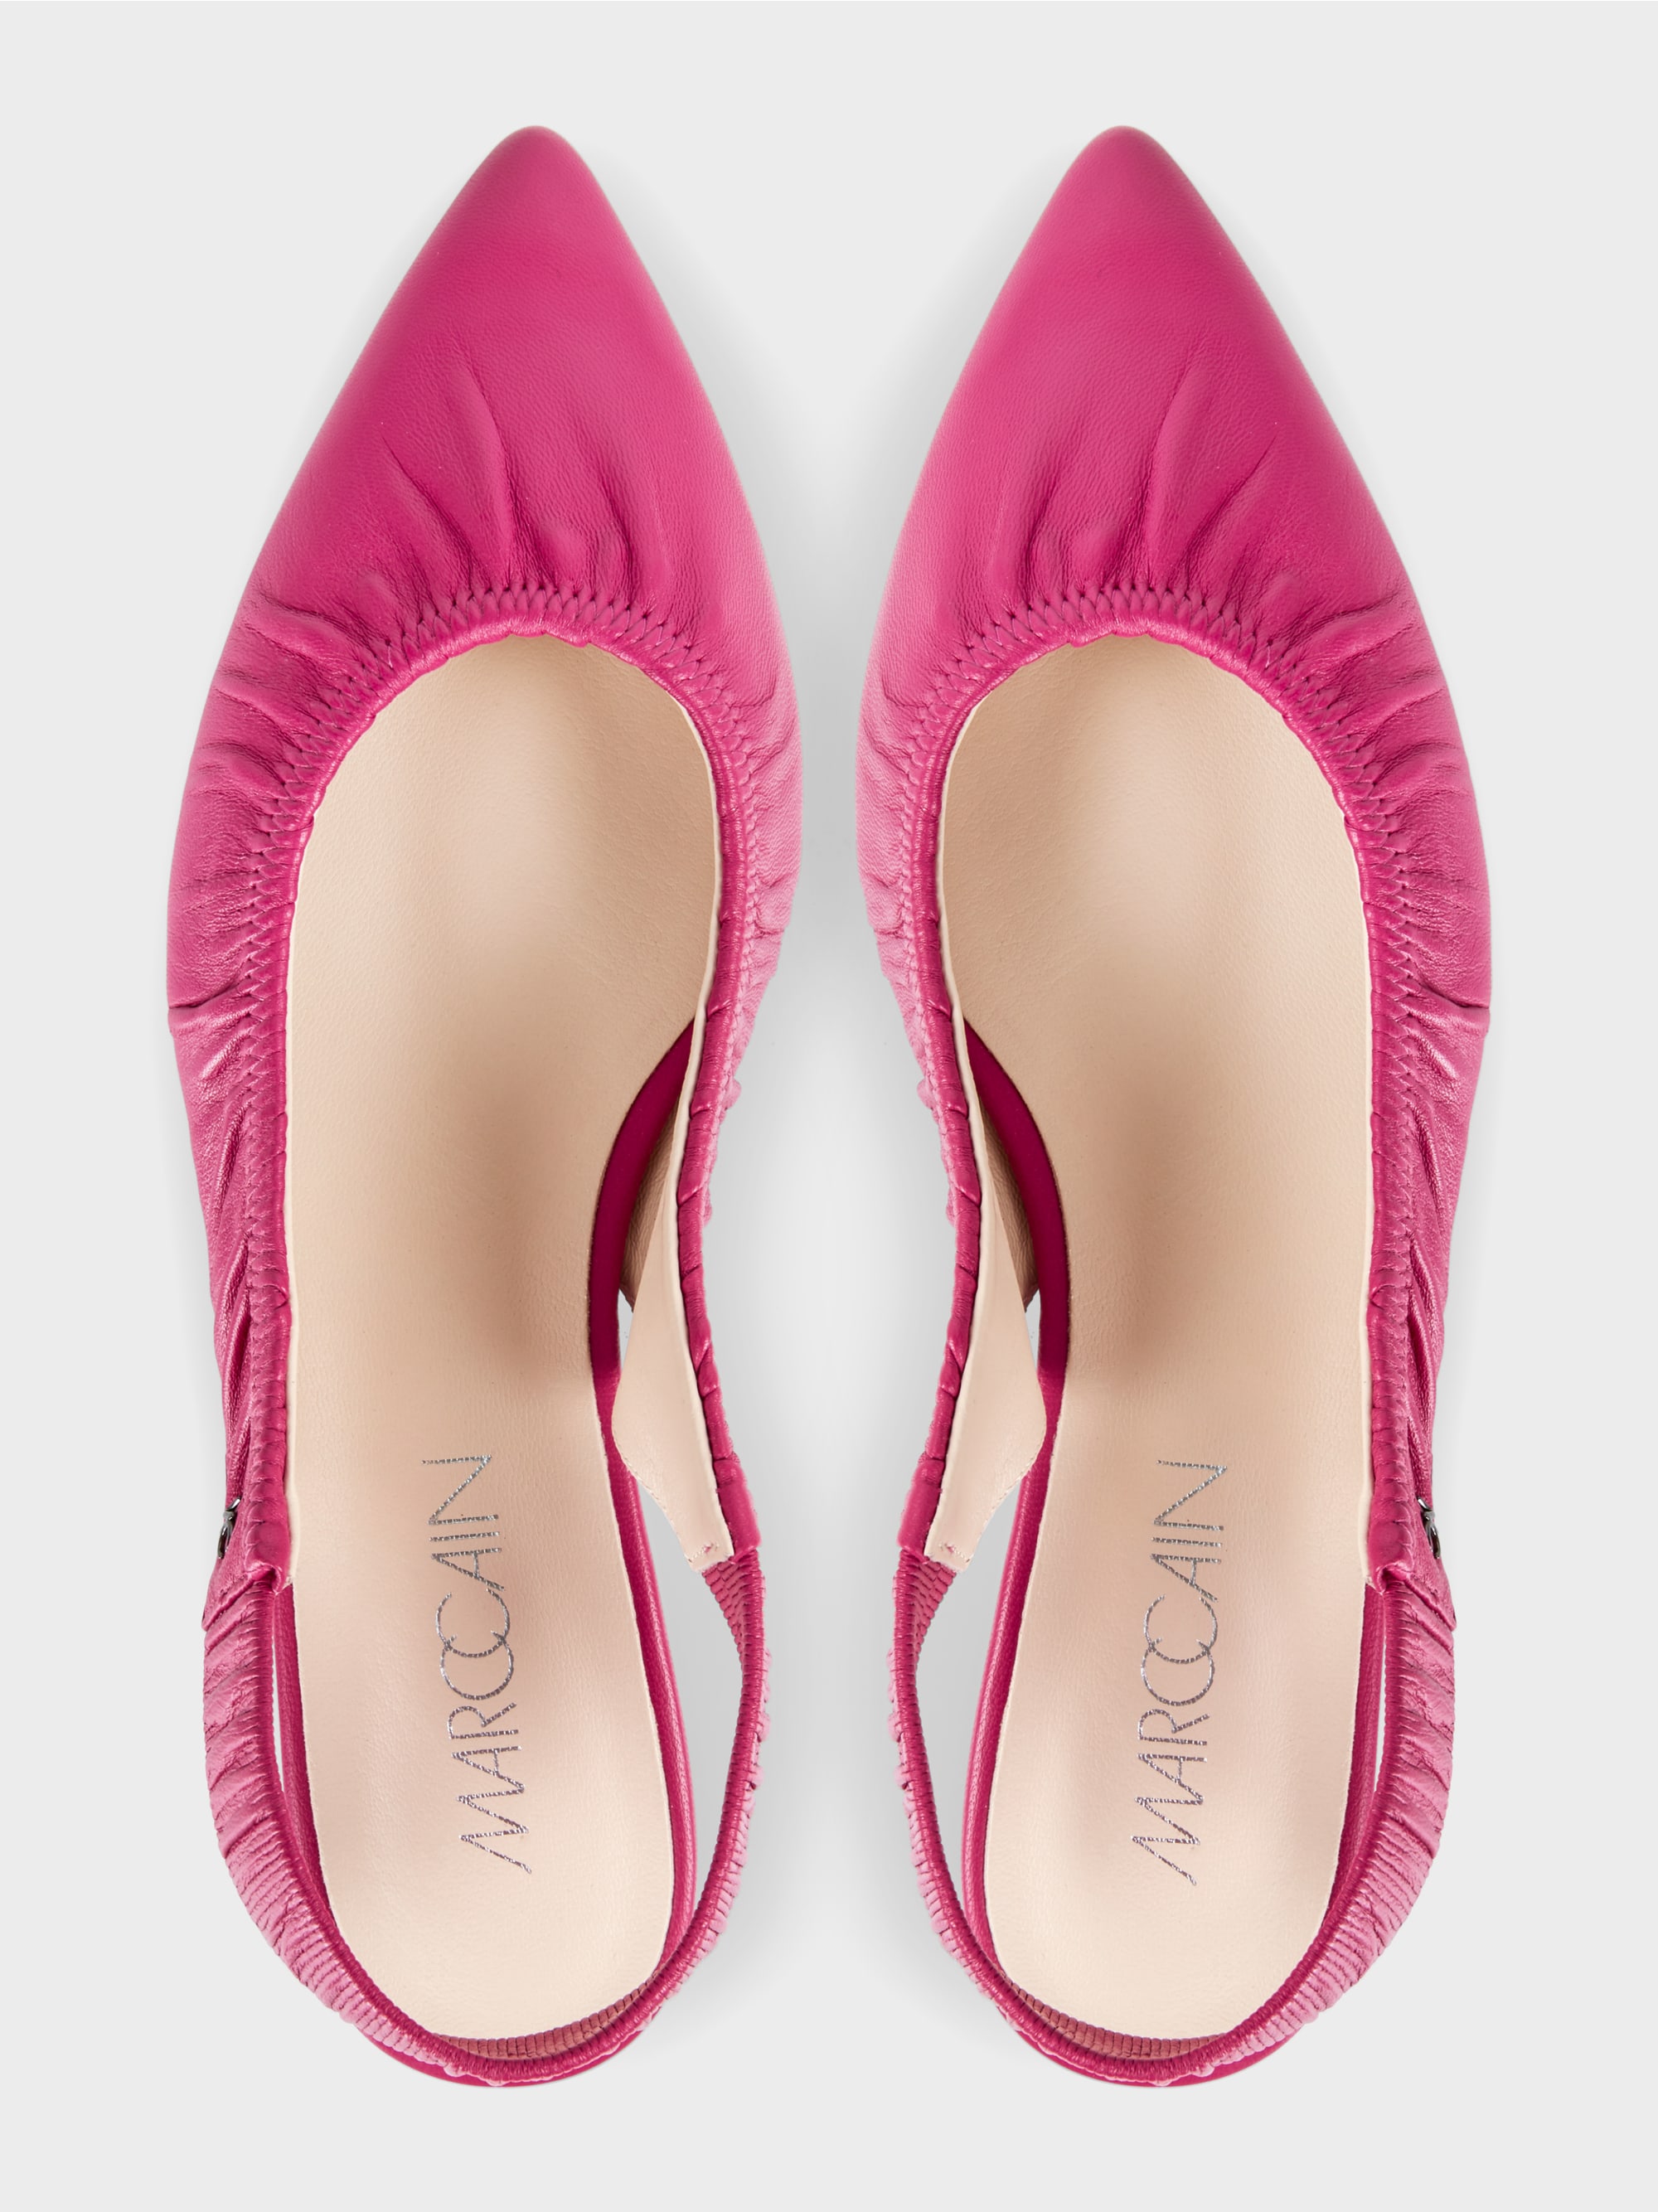 Marc Cain Bright Pink Leather Pump Sandals